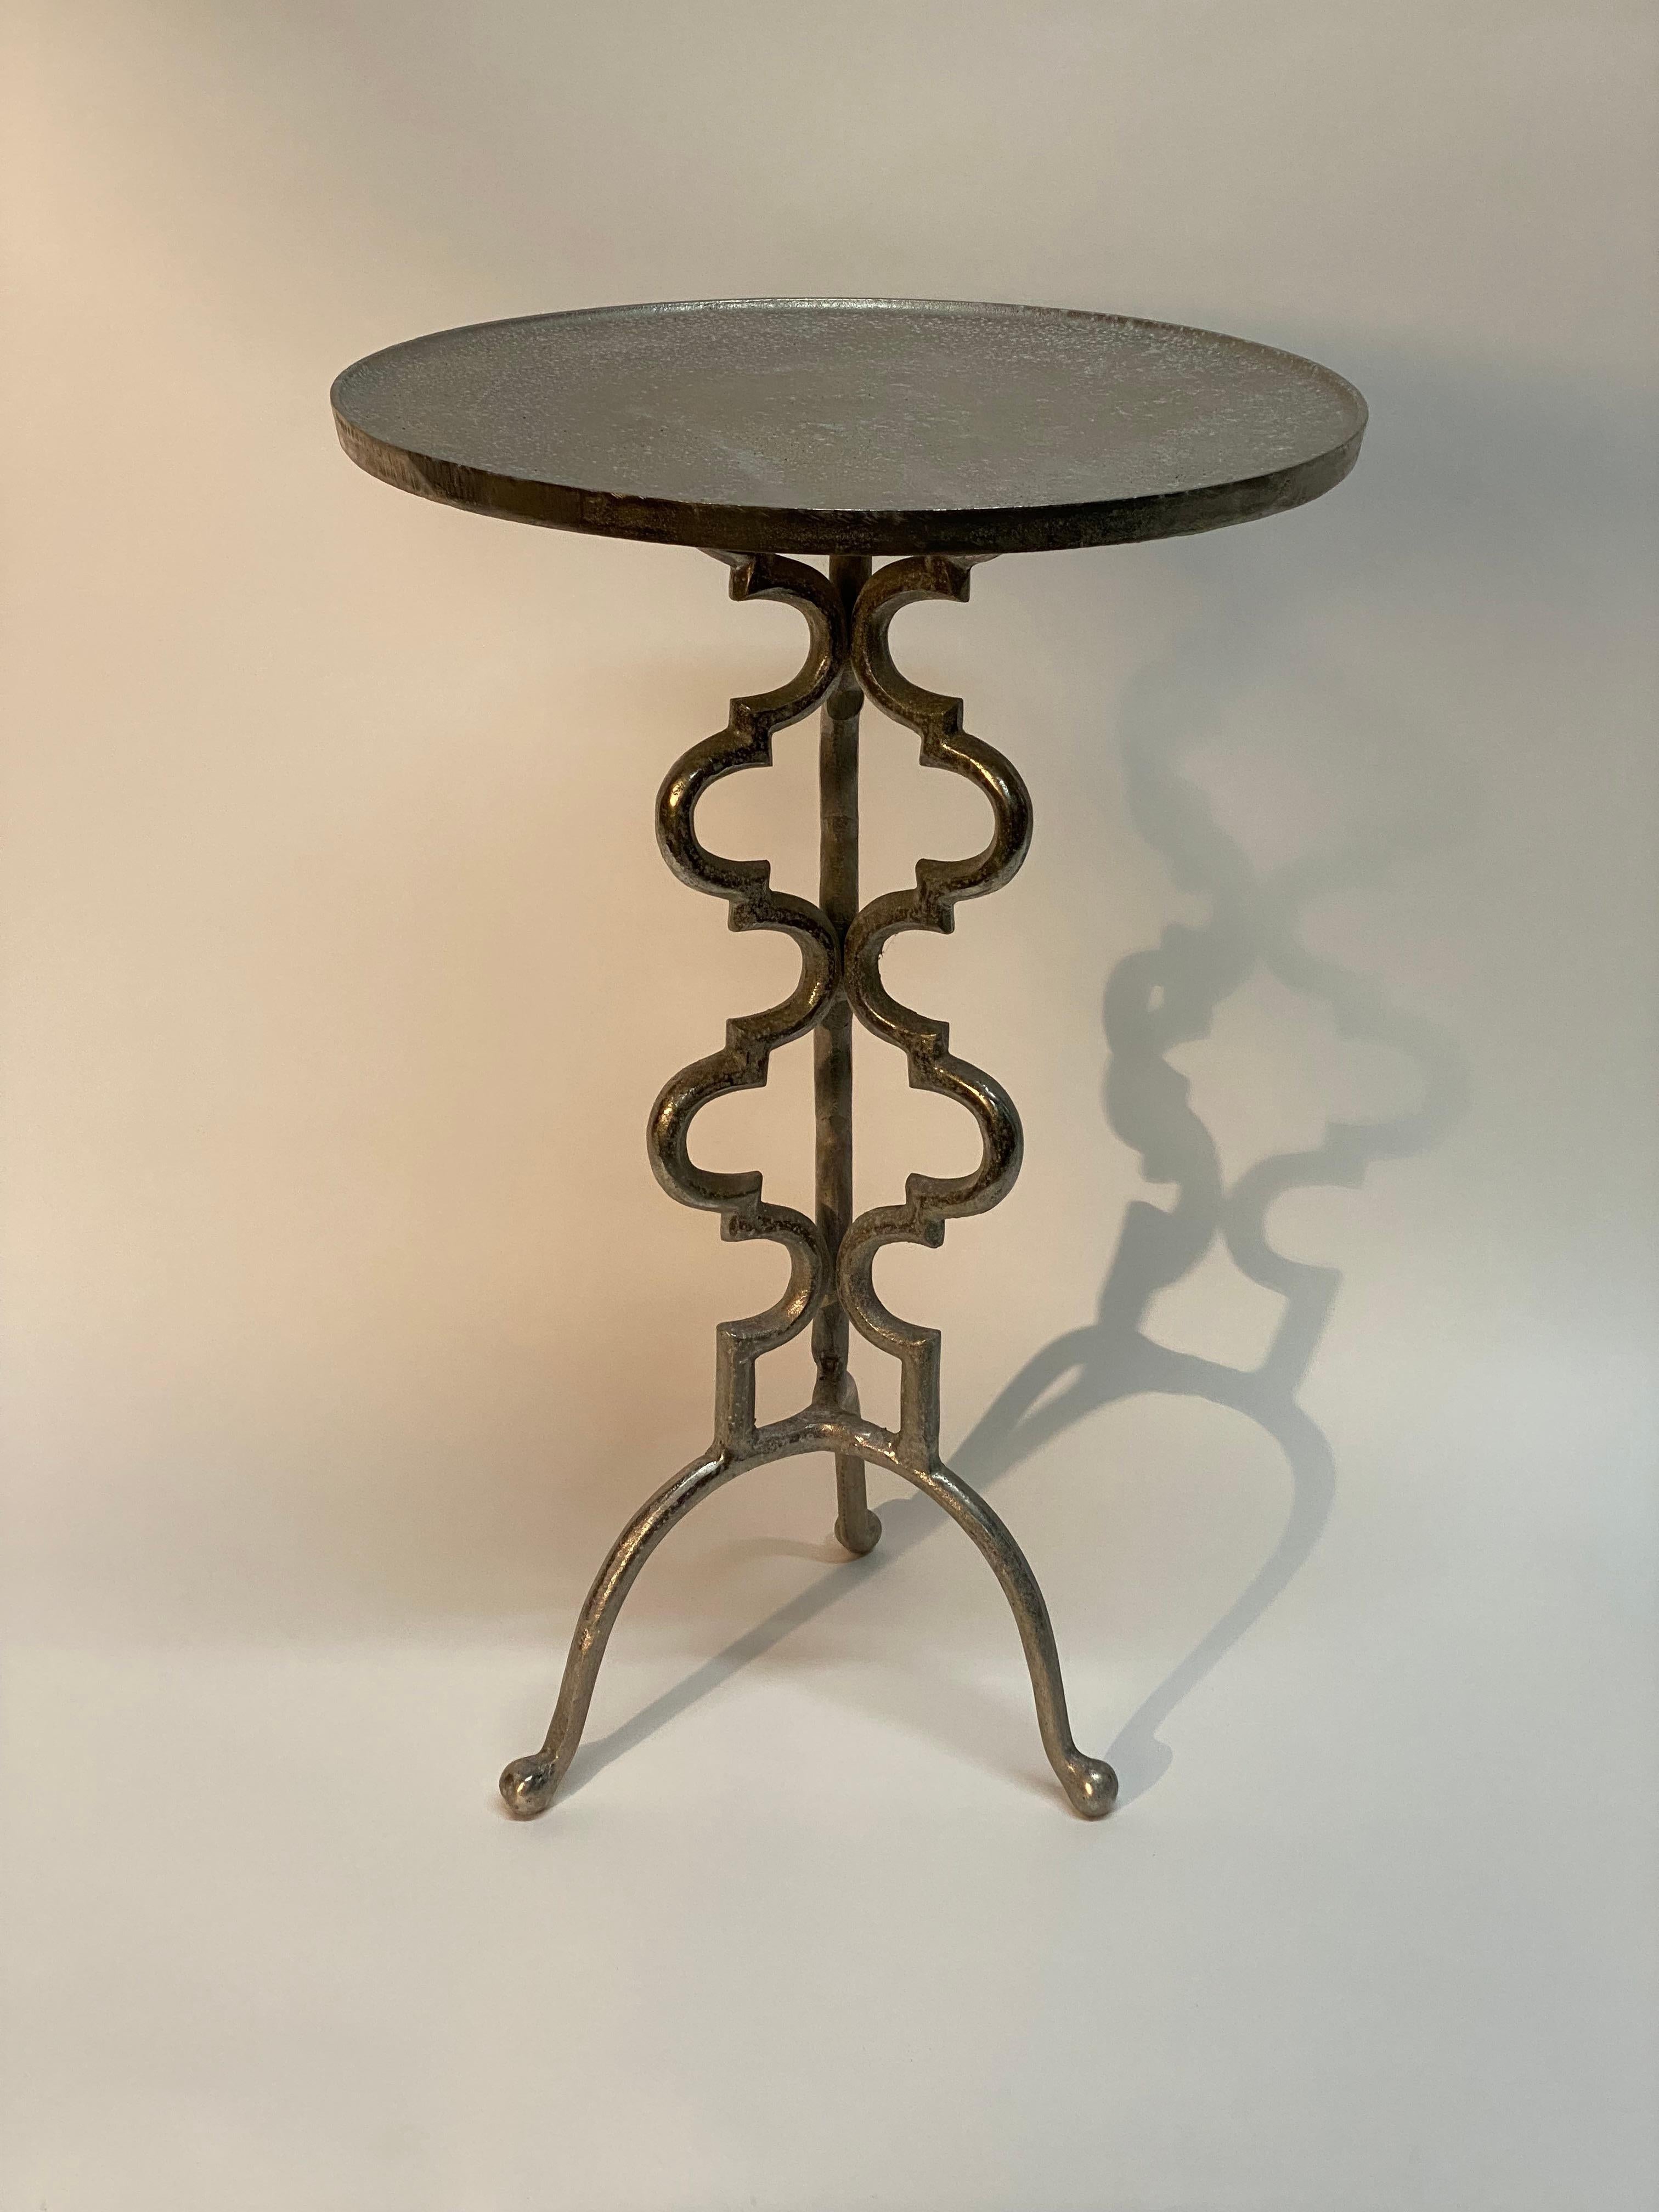 Tall cast aluminum tripod base accent table. An excellent example of Brutalist period piece. Slightly recessed round top with a nicely reticulated designed column supported by three curved legs ending with rounded ball feet. Endless uses as a plant